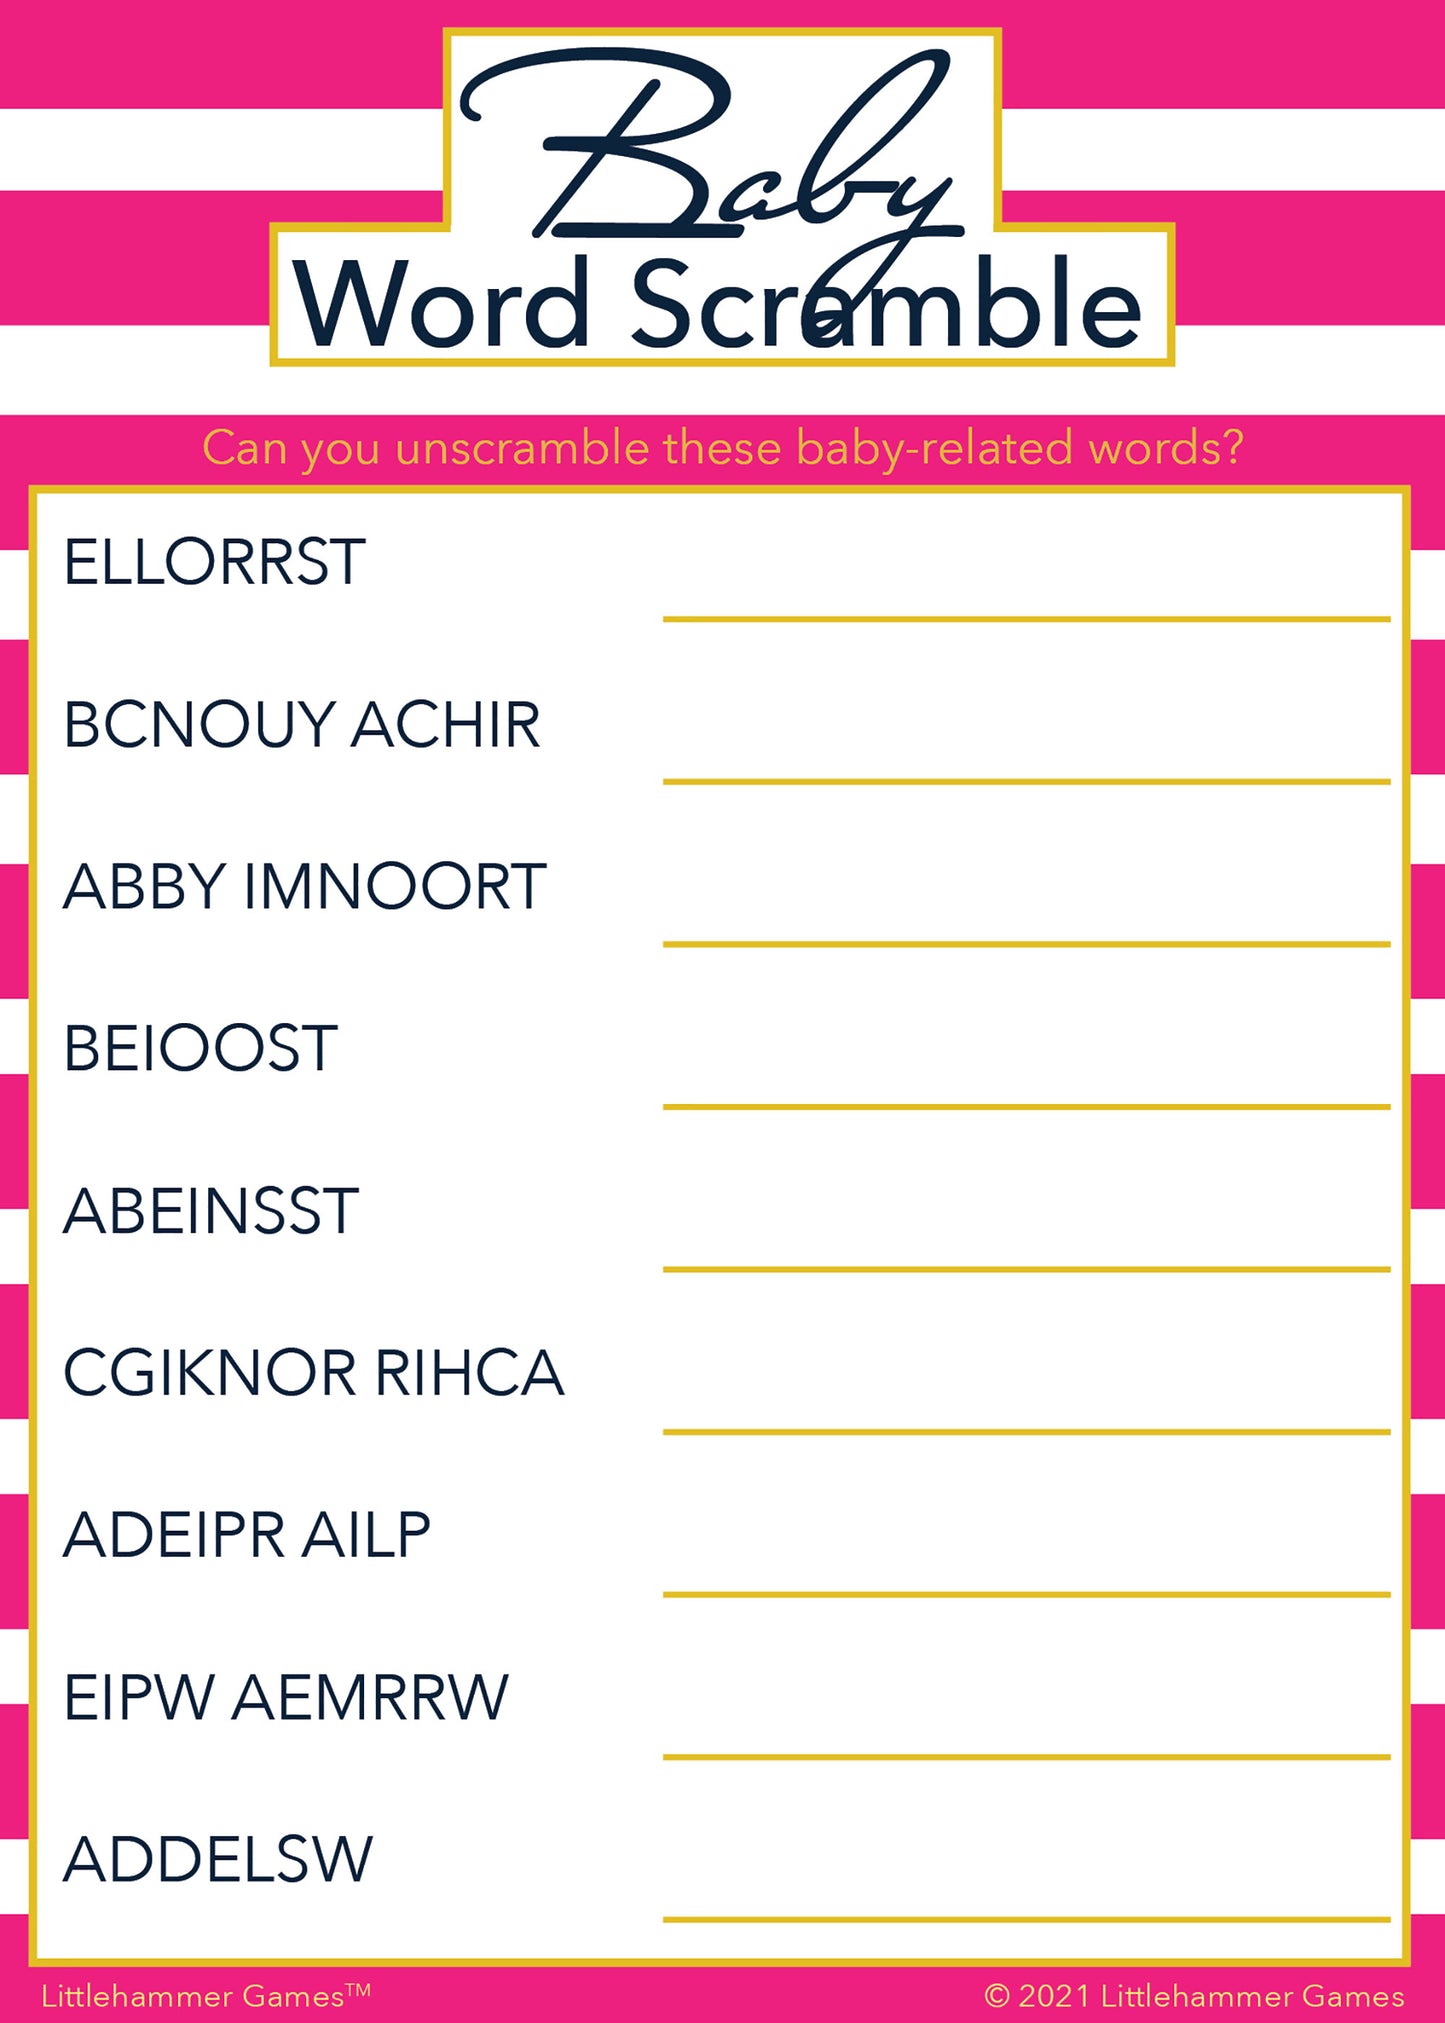 Baby Word Scramble game card with a pink-striped background